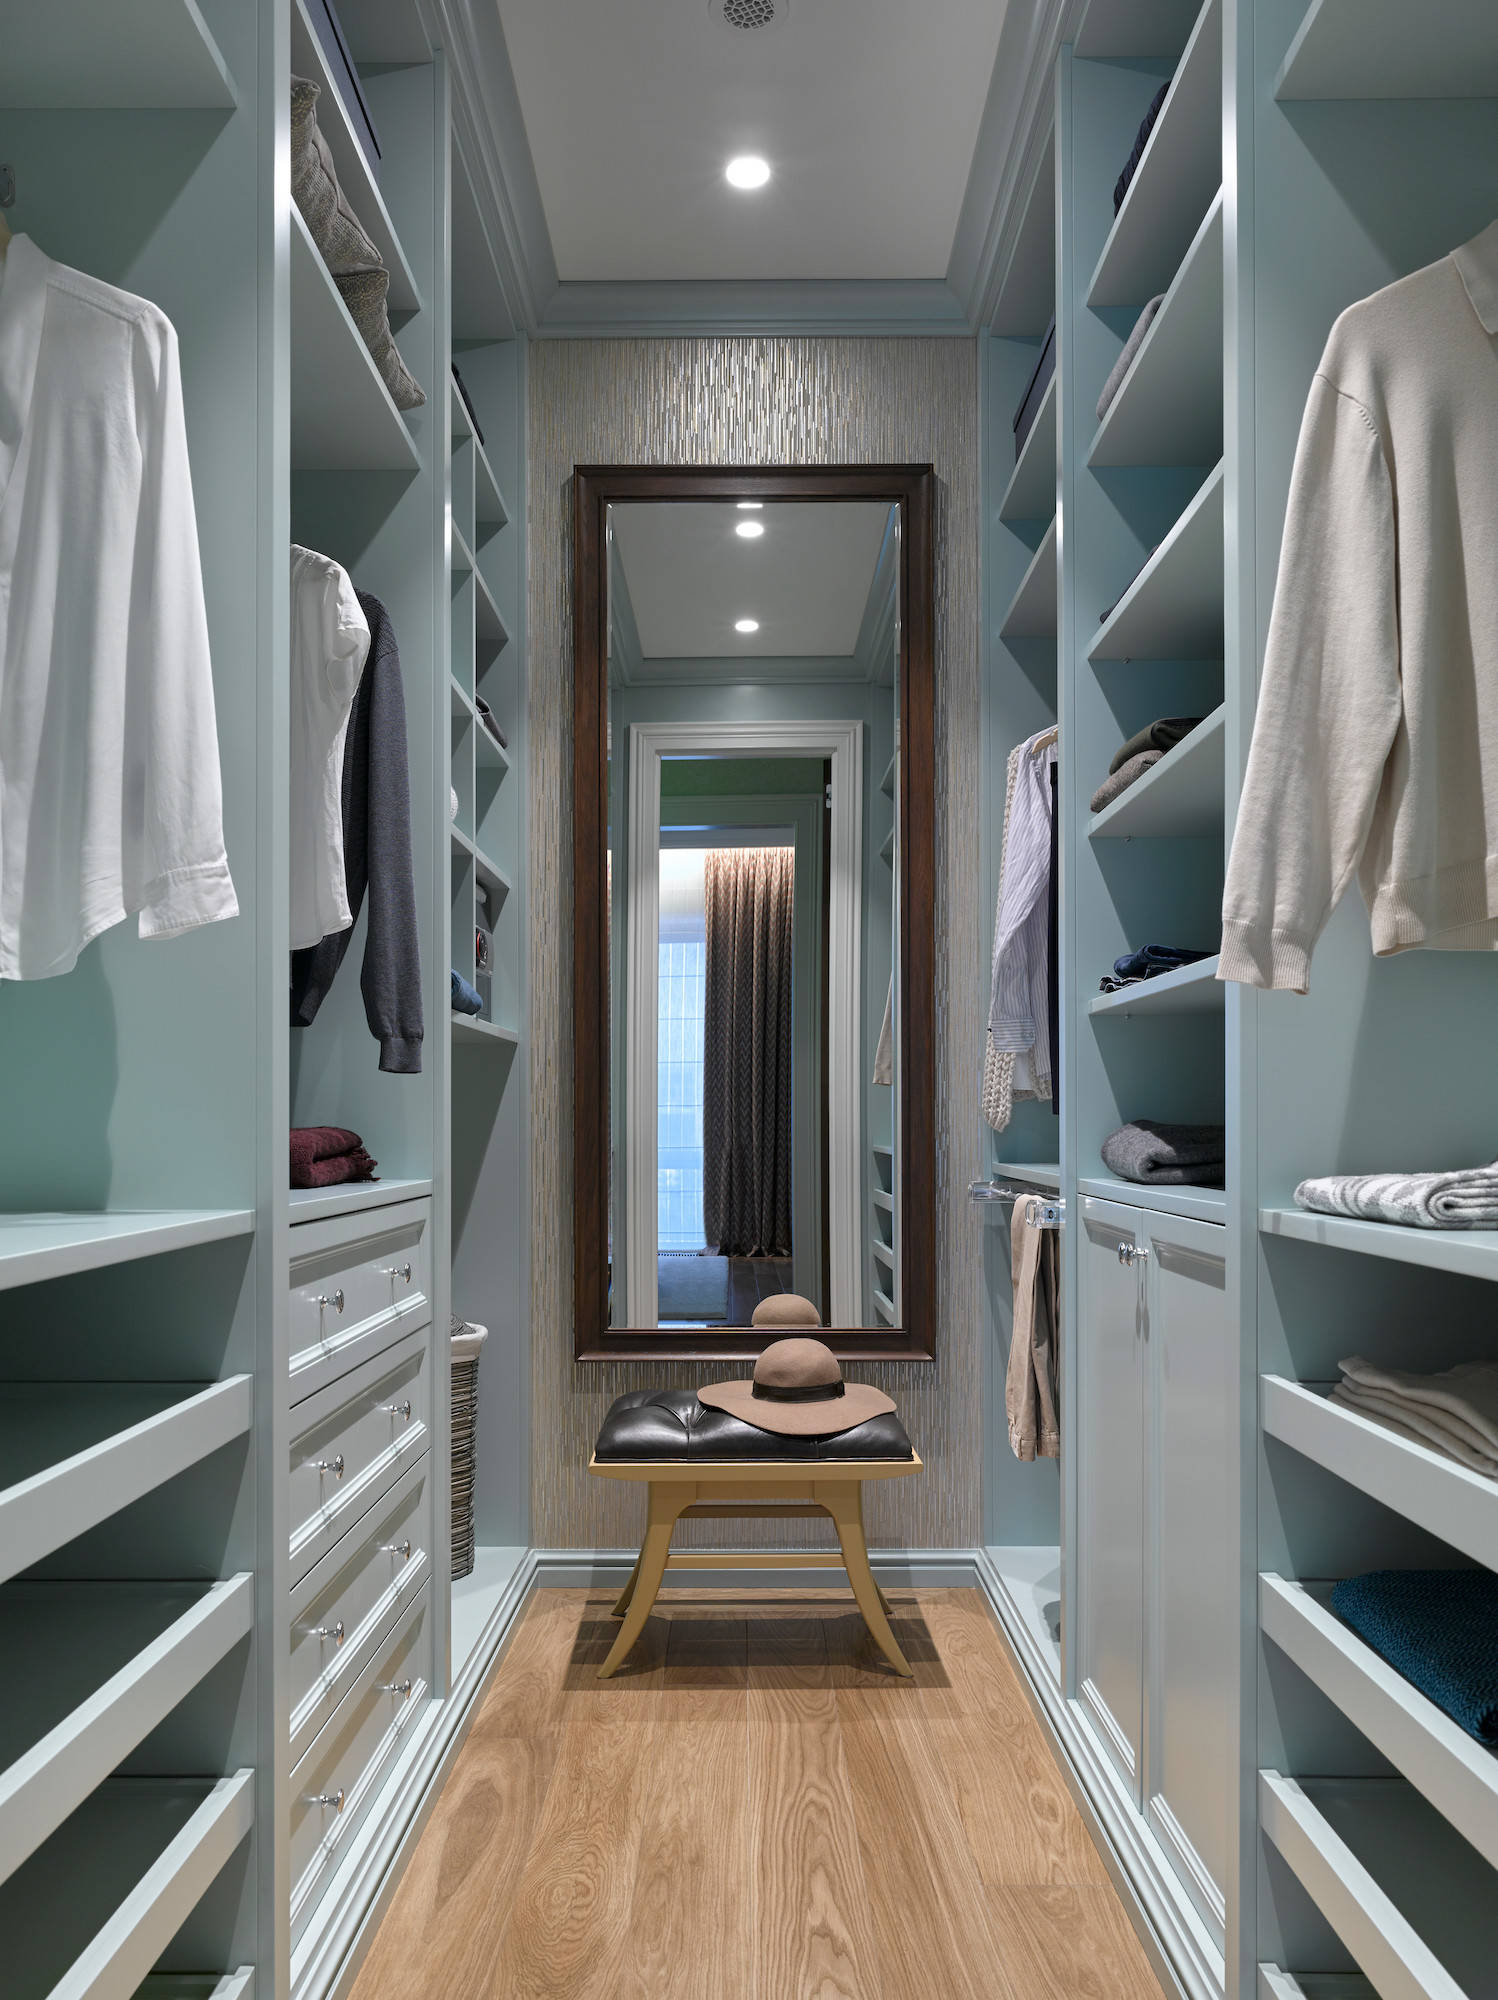 75 Small Walk-In Closet Ideas You'll Love - April, 2023 | Houzz